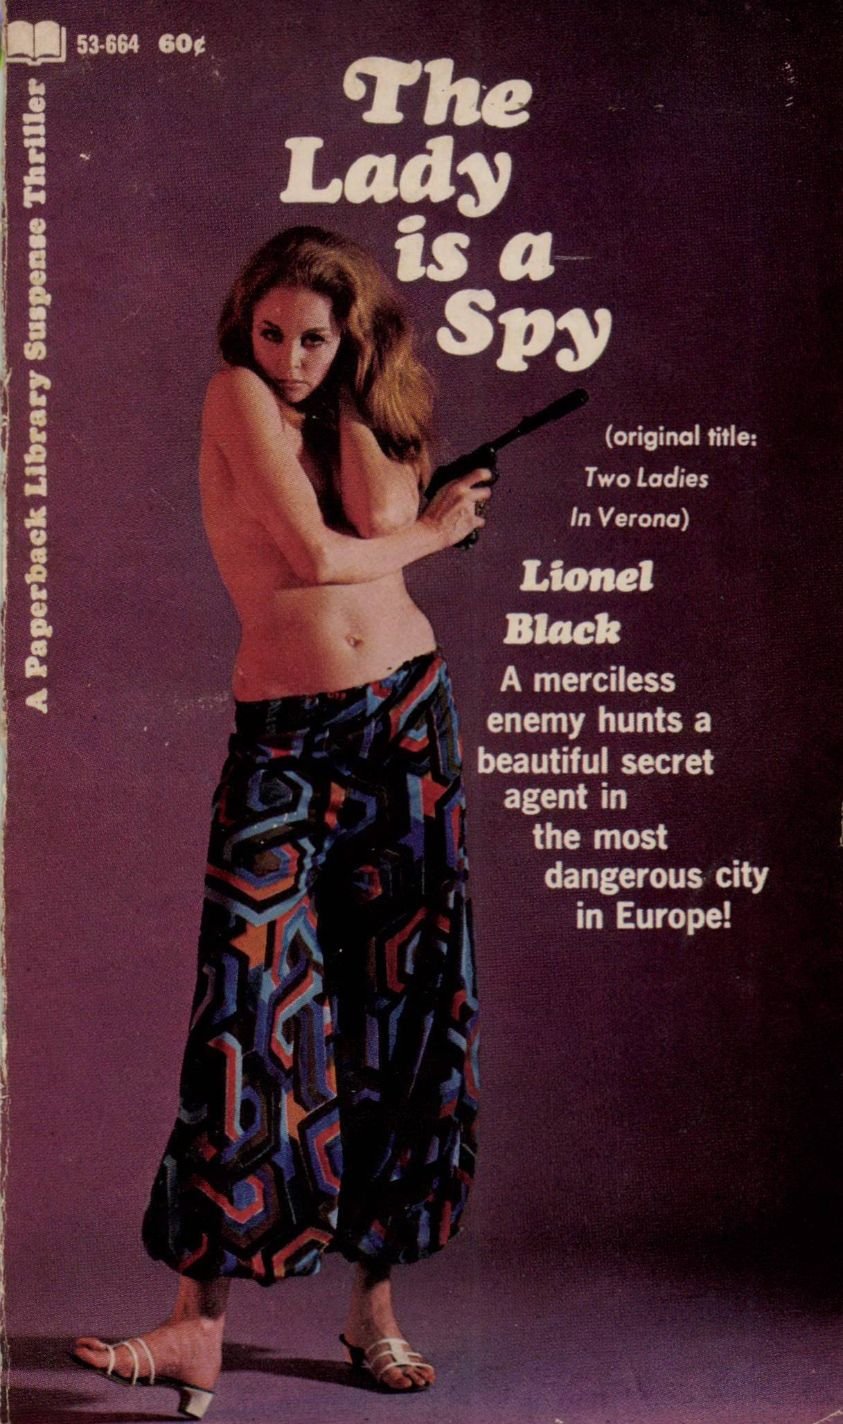 The Lady is a Spy Lionel Black 001.jpg